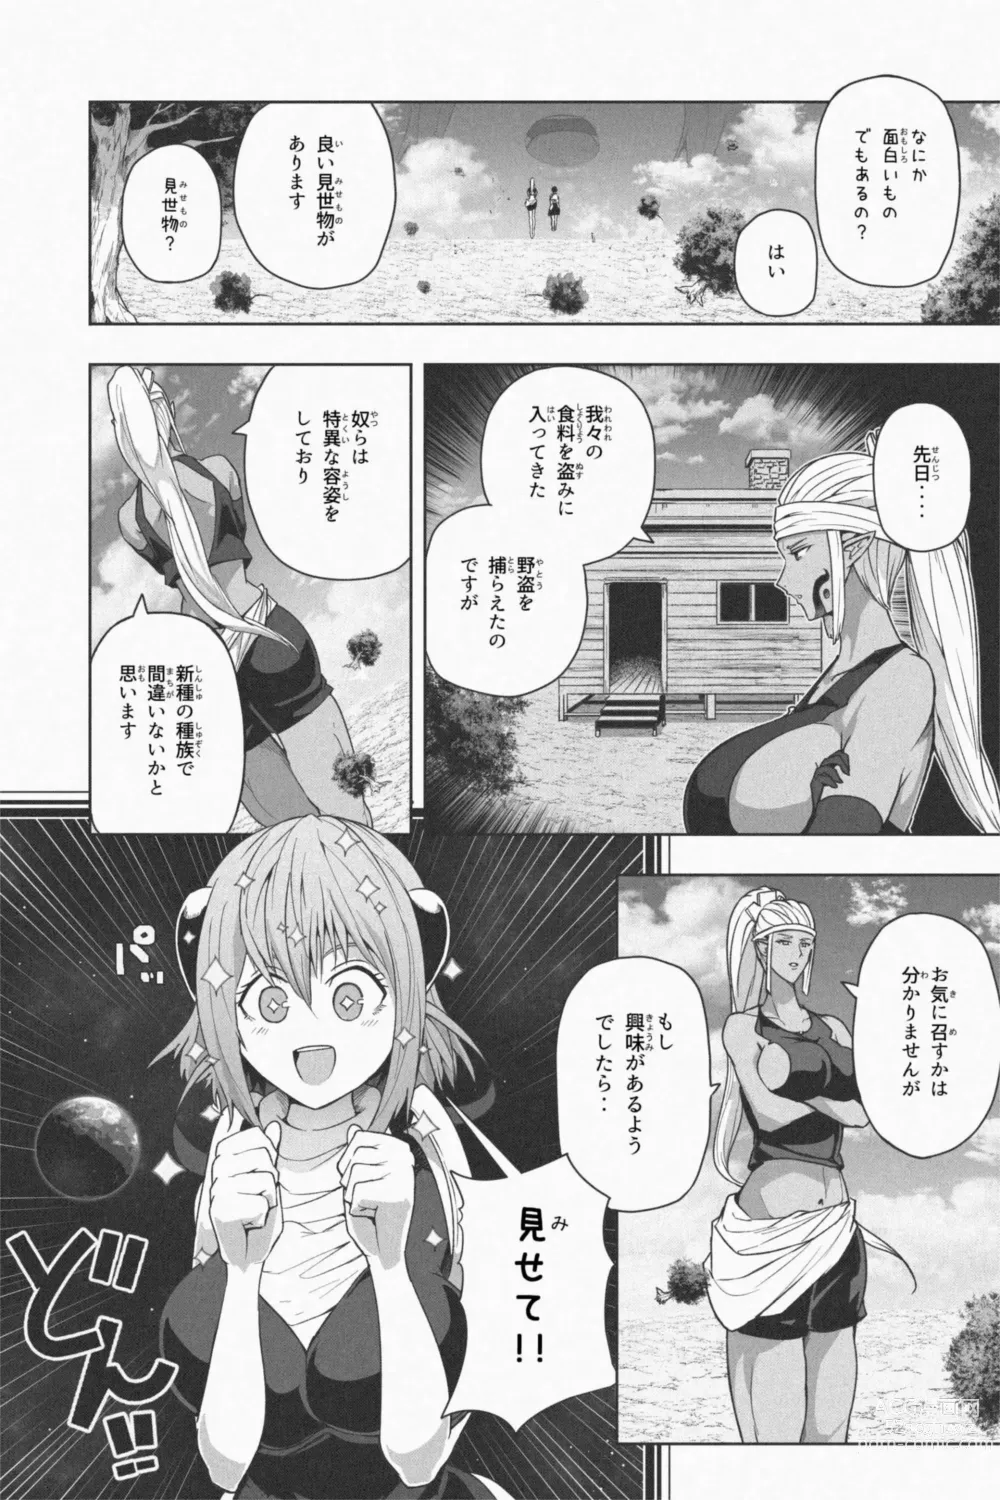 Page 12 of doujinshi NEW Chikyuu de Asobo - NEW Play with earth